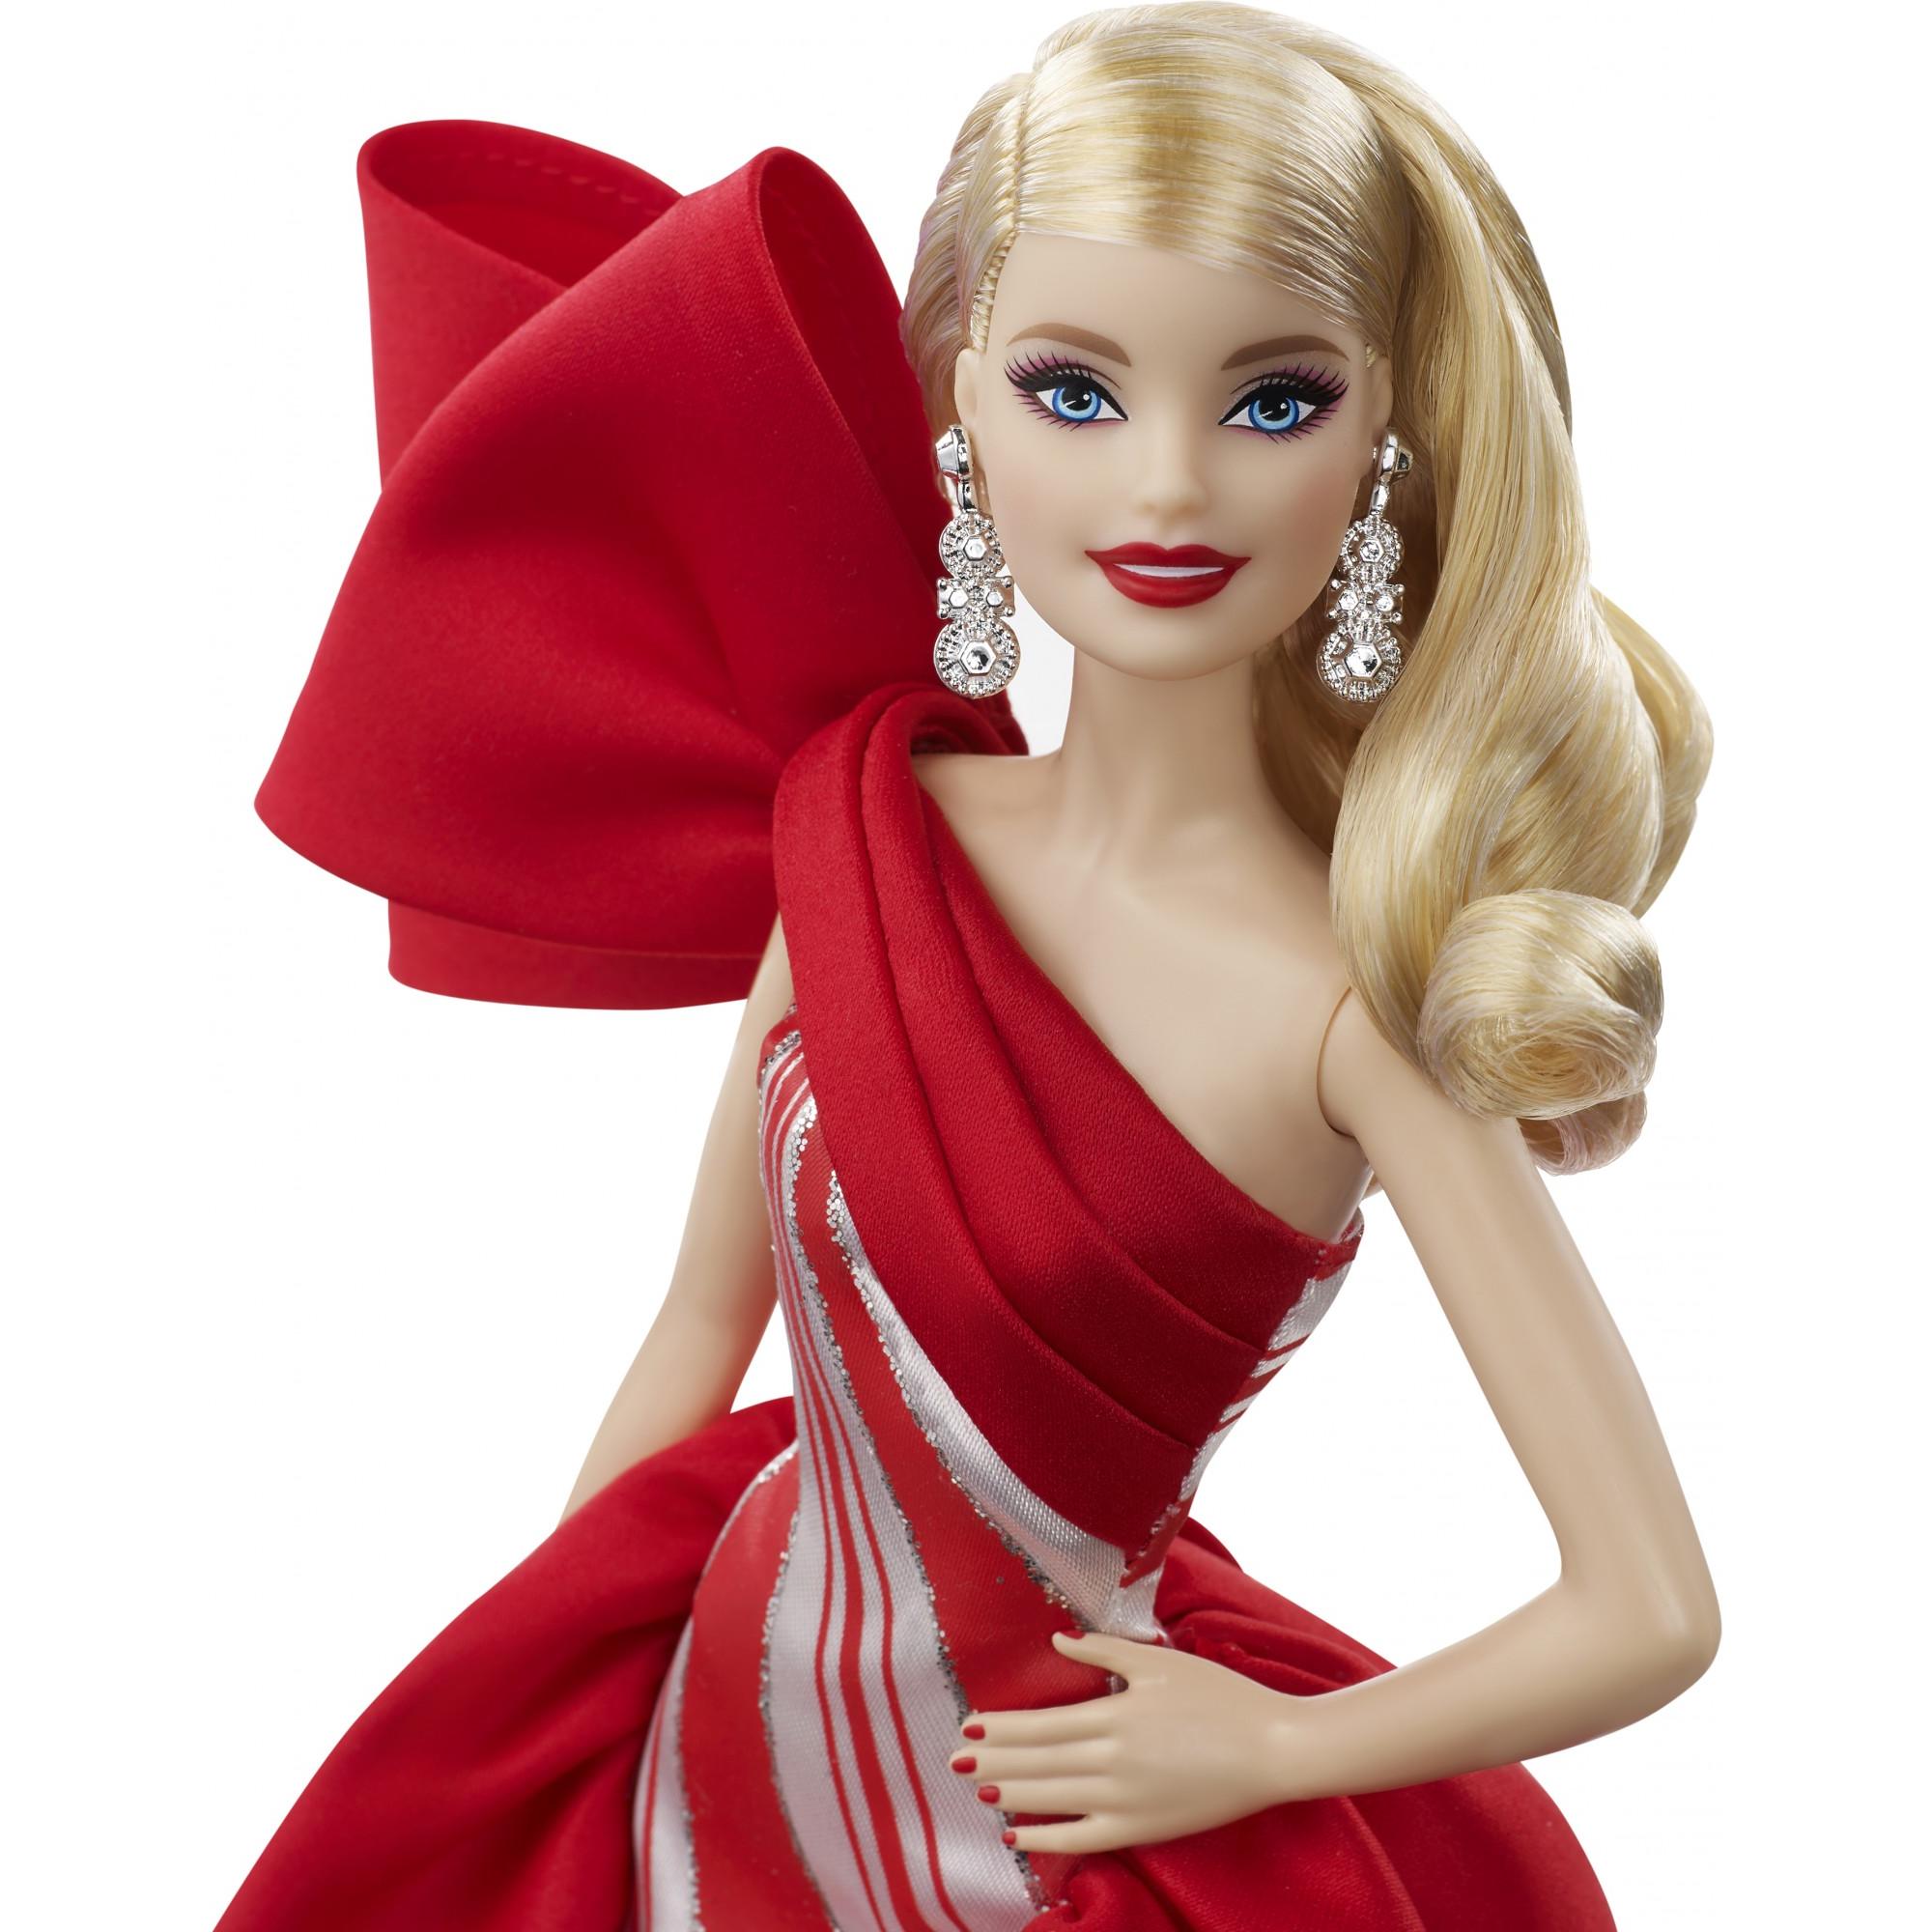 Barbie 2019 Holiday Doll, Blonde Curls with Red & White Gown - image 6 of 10